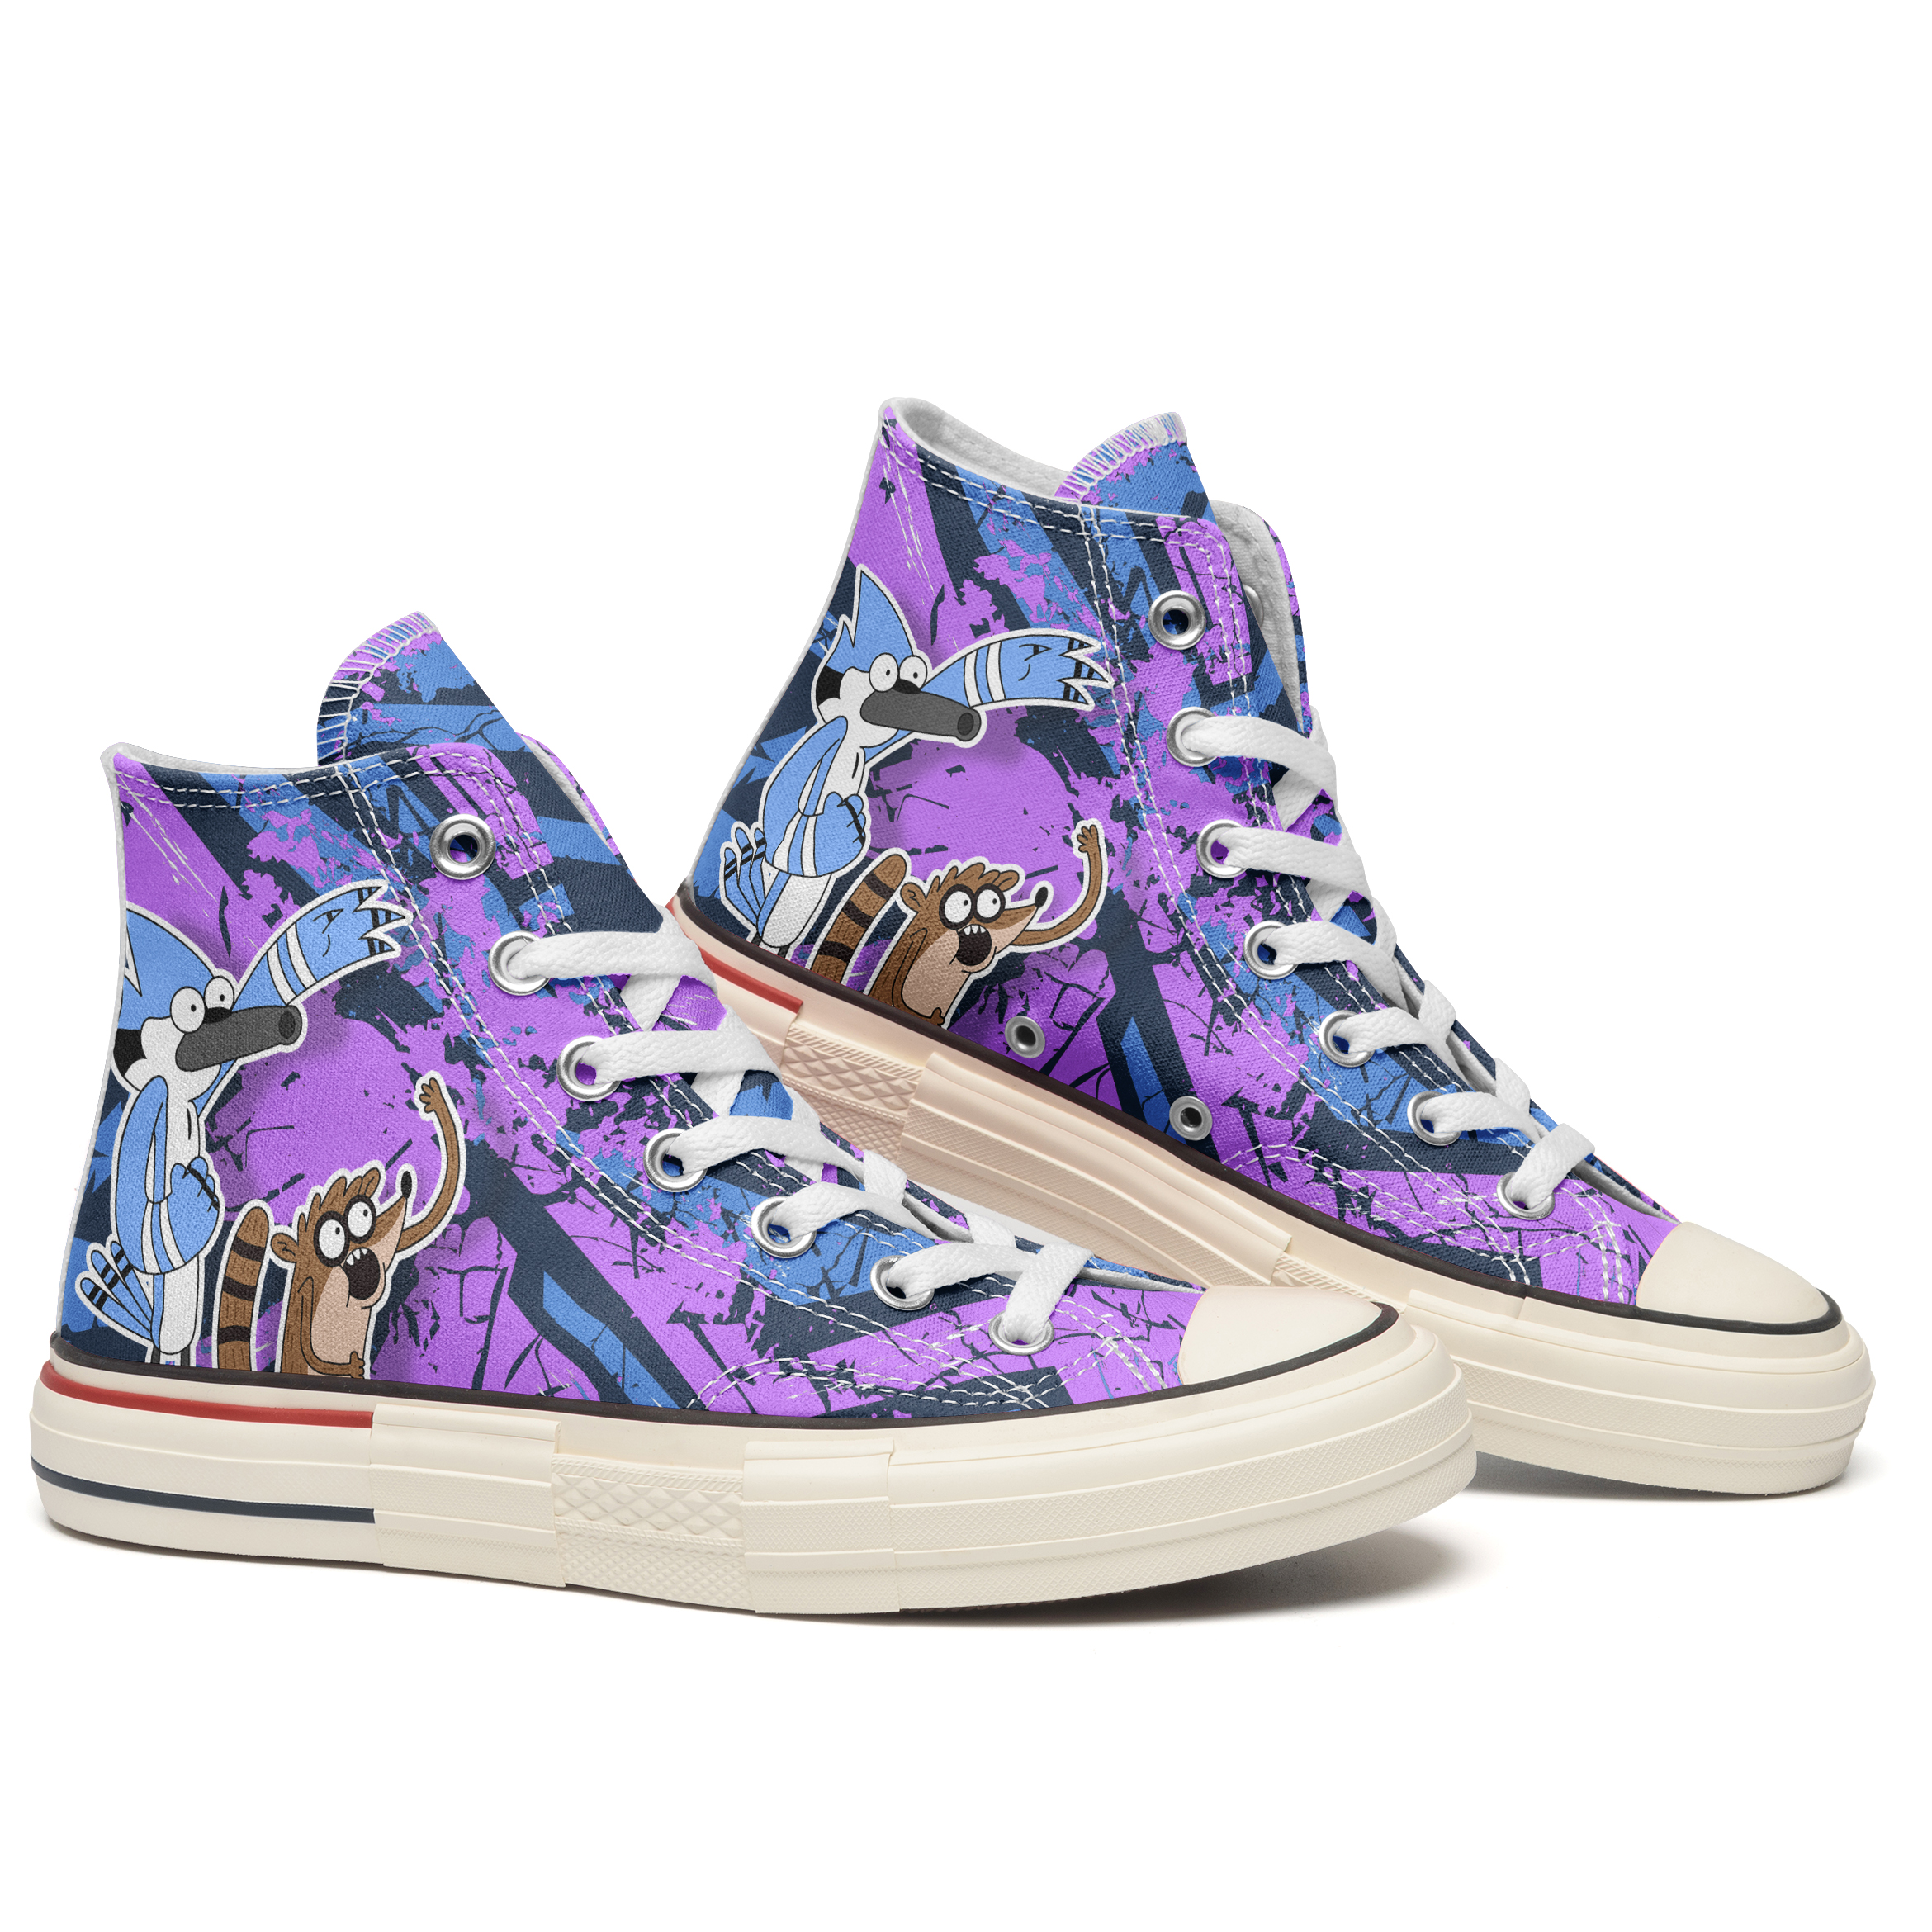 Buzz Lightyear High Top Canvas Shoes Special Edition